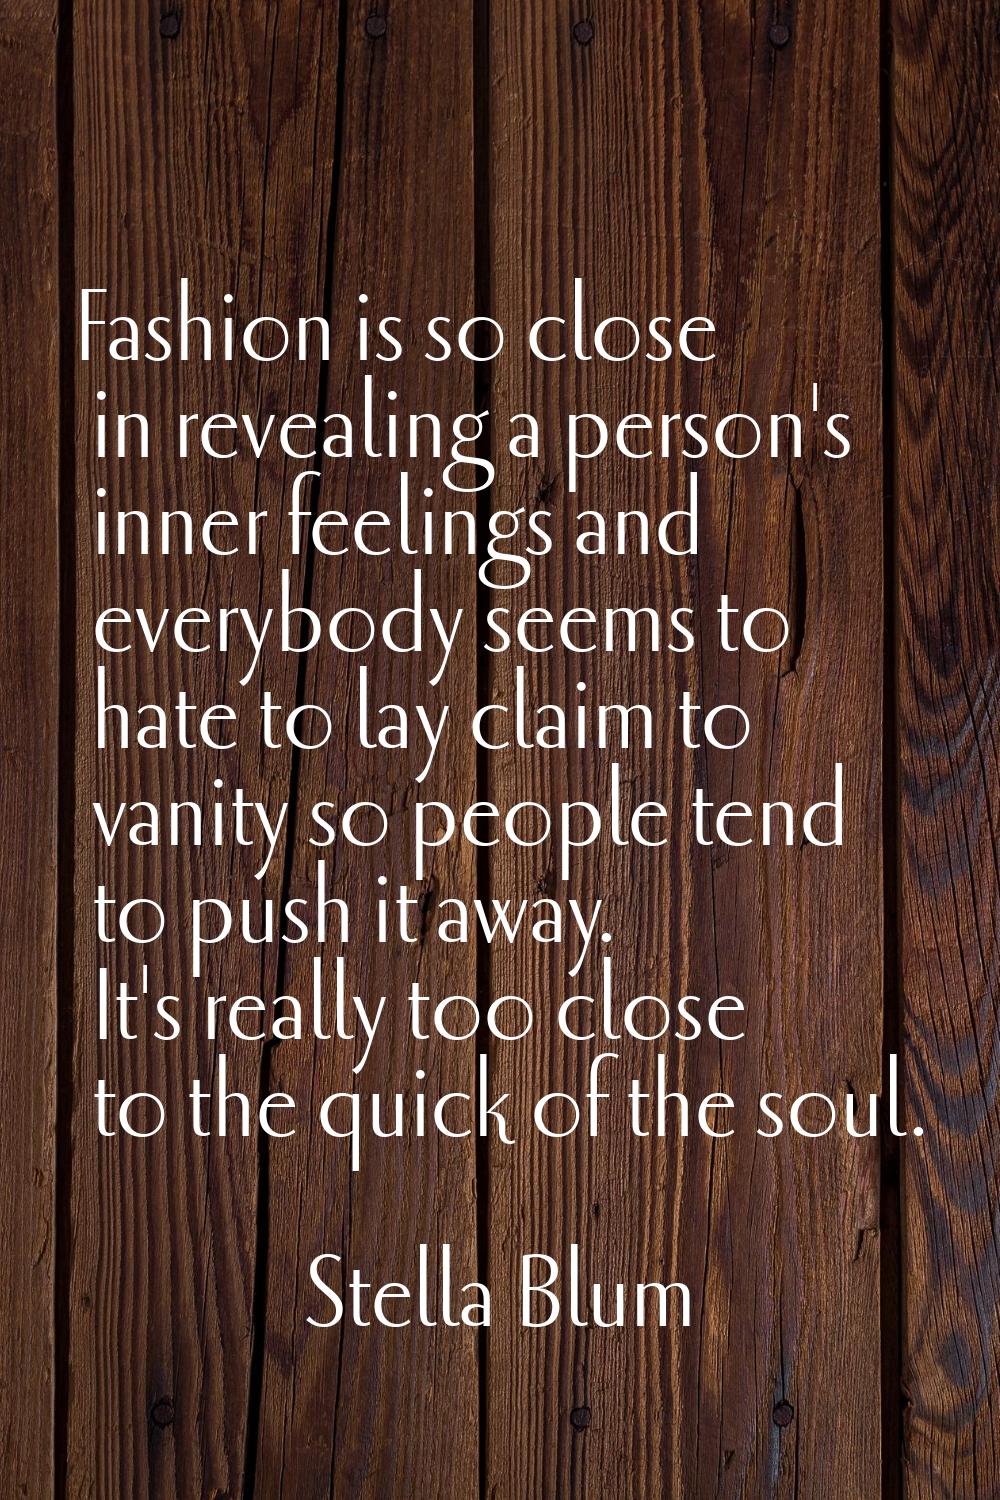 Fashion is so close in revealing a person's inner feelings and everybody seems to hate to lay claim